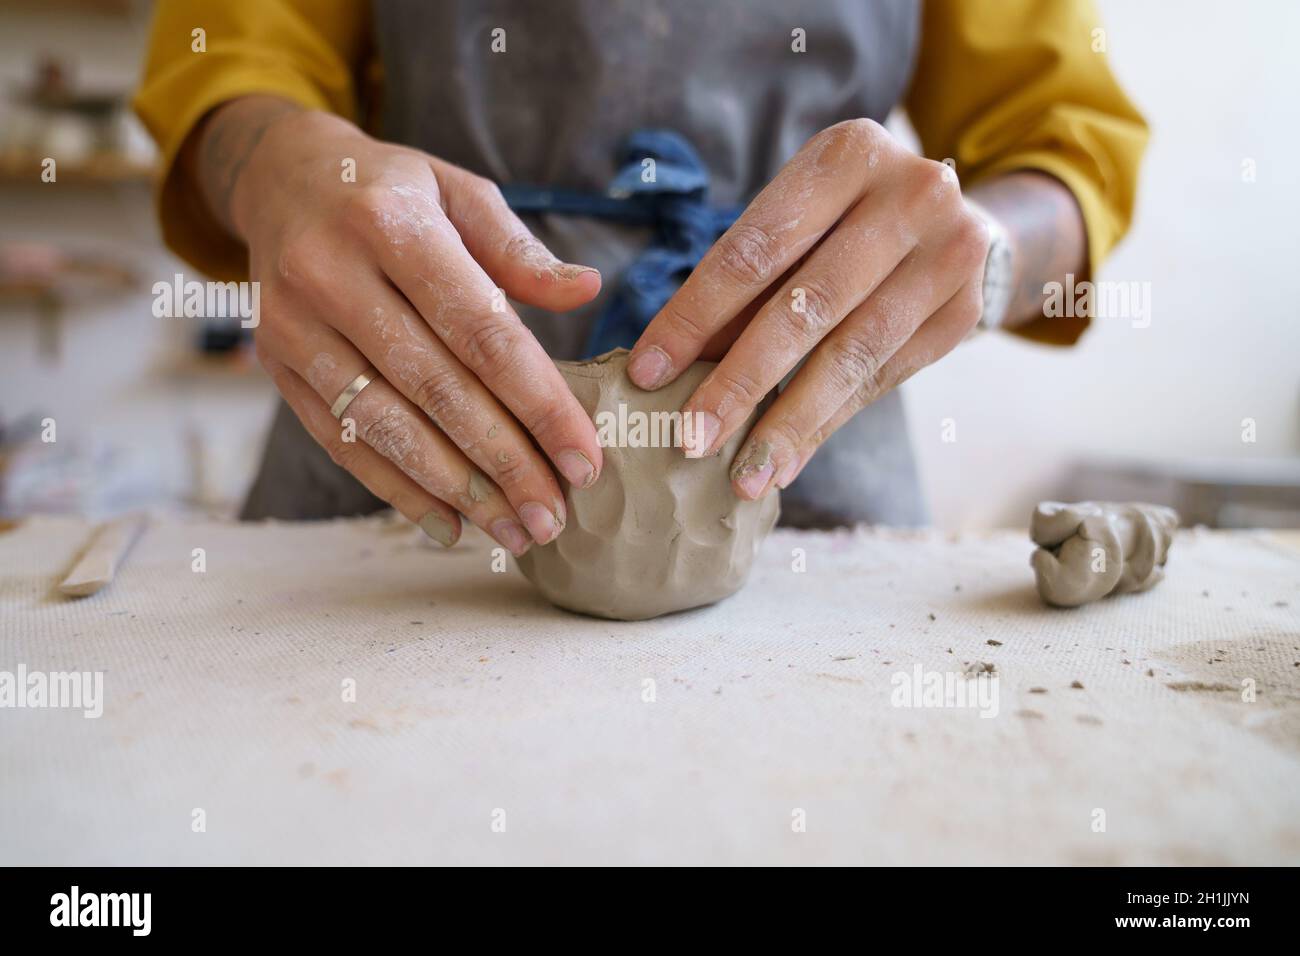 Work with your hands: artist female molding raw clay for sculpturing and shaping pottery or ceramics Stock Photo